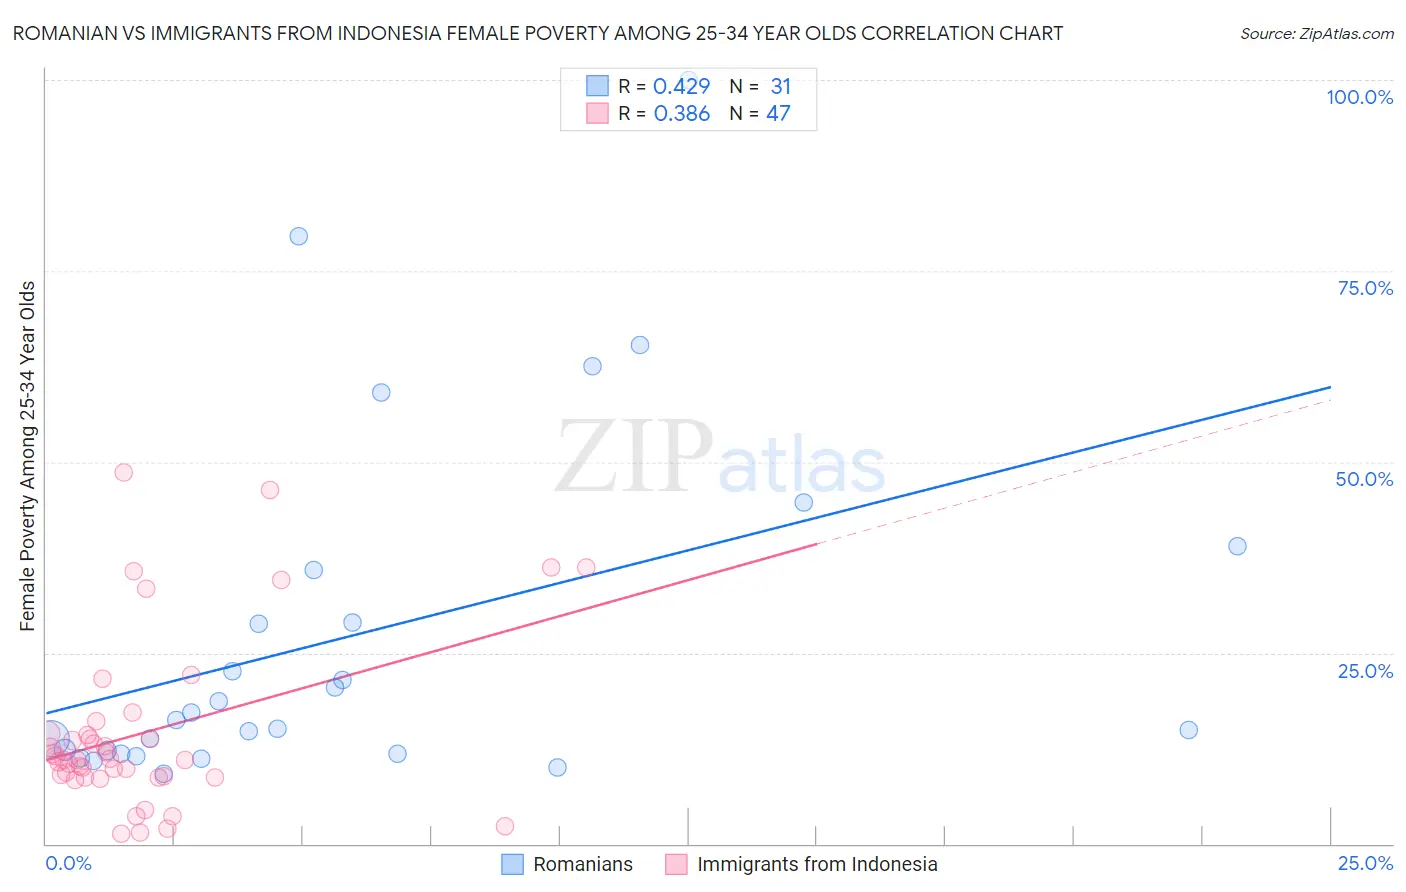 Romanian vs Immigrants from Indonesia Female Poverty Among 25-34 Year Olds